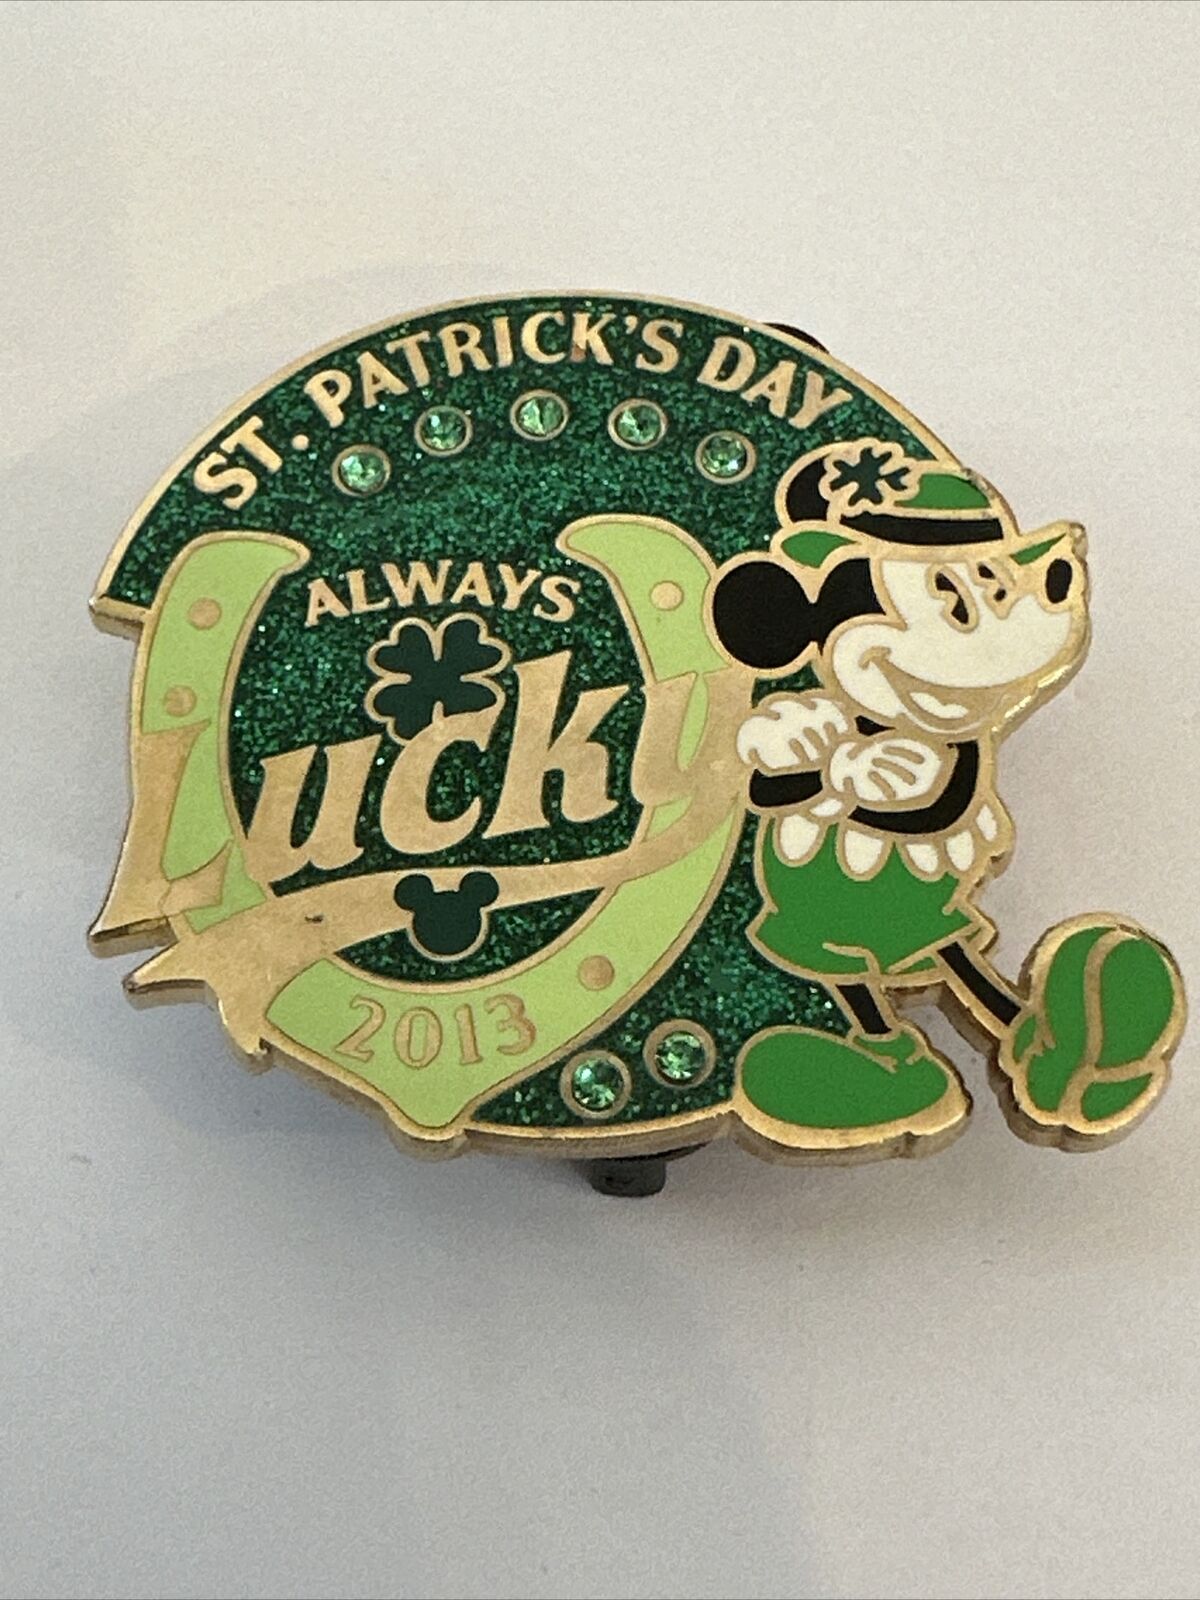 DISNEY WDW DLR ST. PATRICK'S DAY 2013 MICKEY MOUSE ALWAYS LUCKY LE 3000 PIN